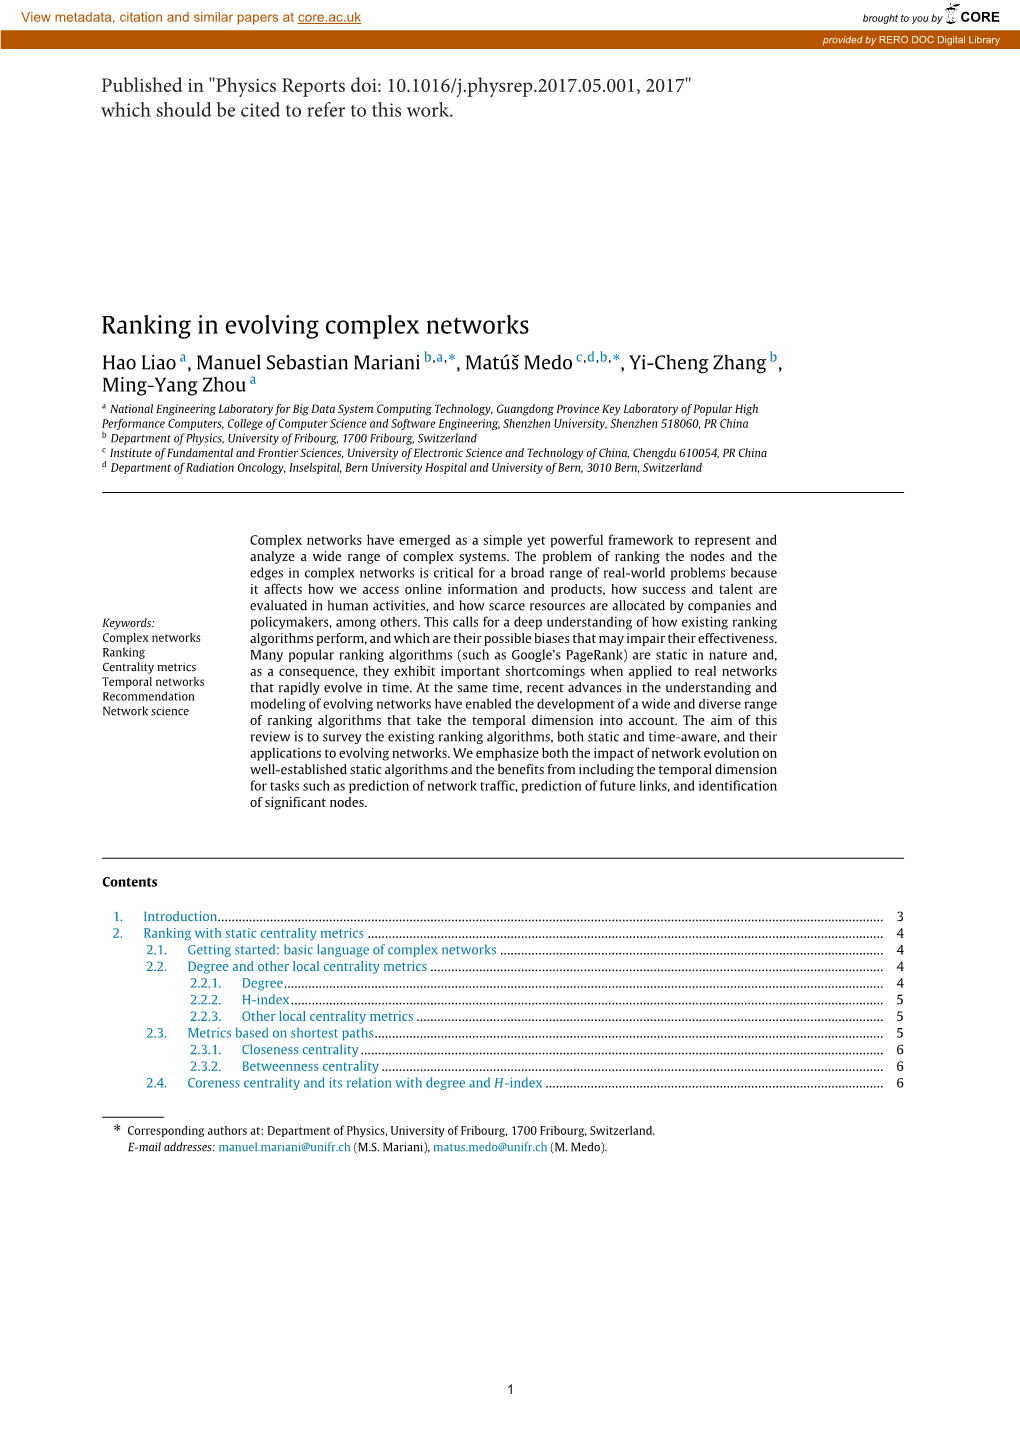 Ranking in Evolving Complex Networks